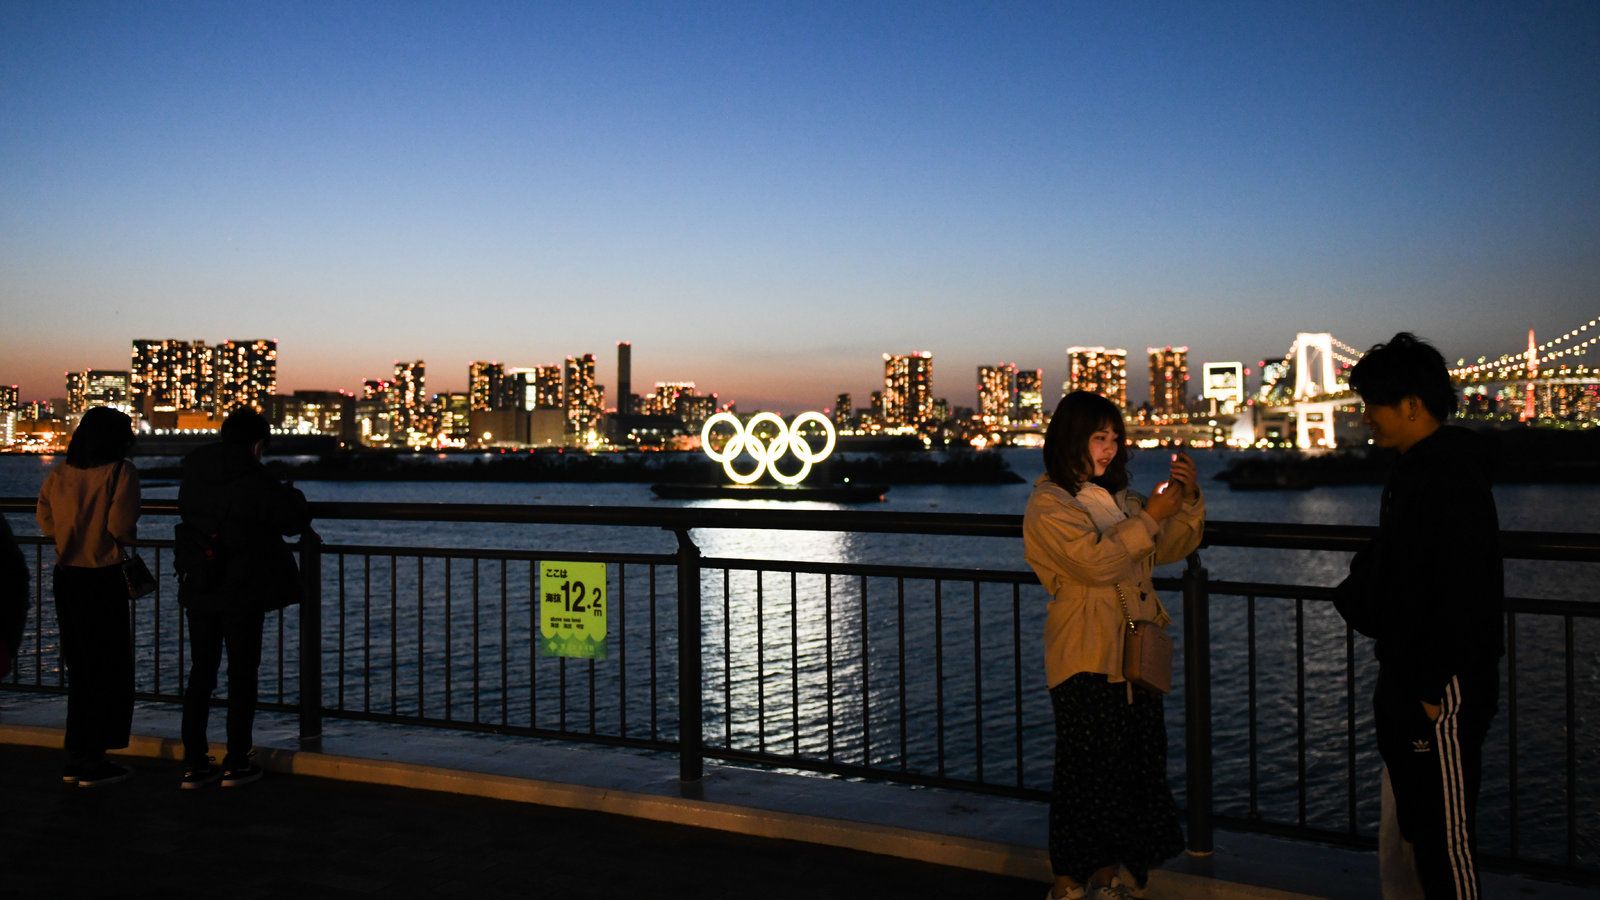 Summer Olympics in Tokyo to Start on July 2021